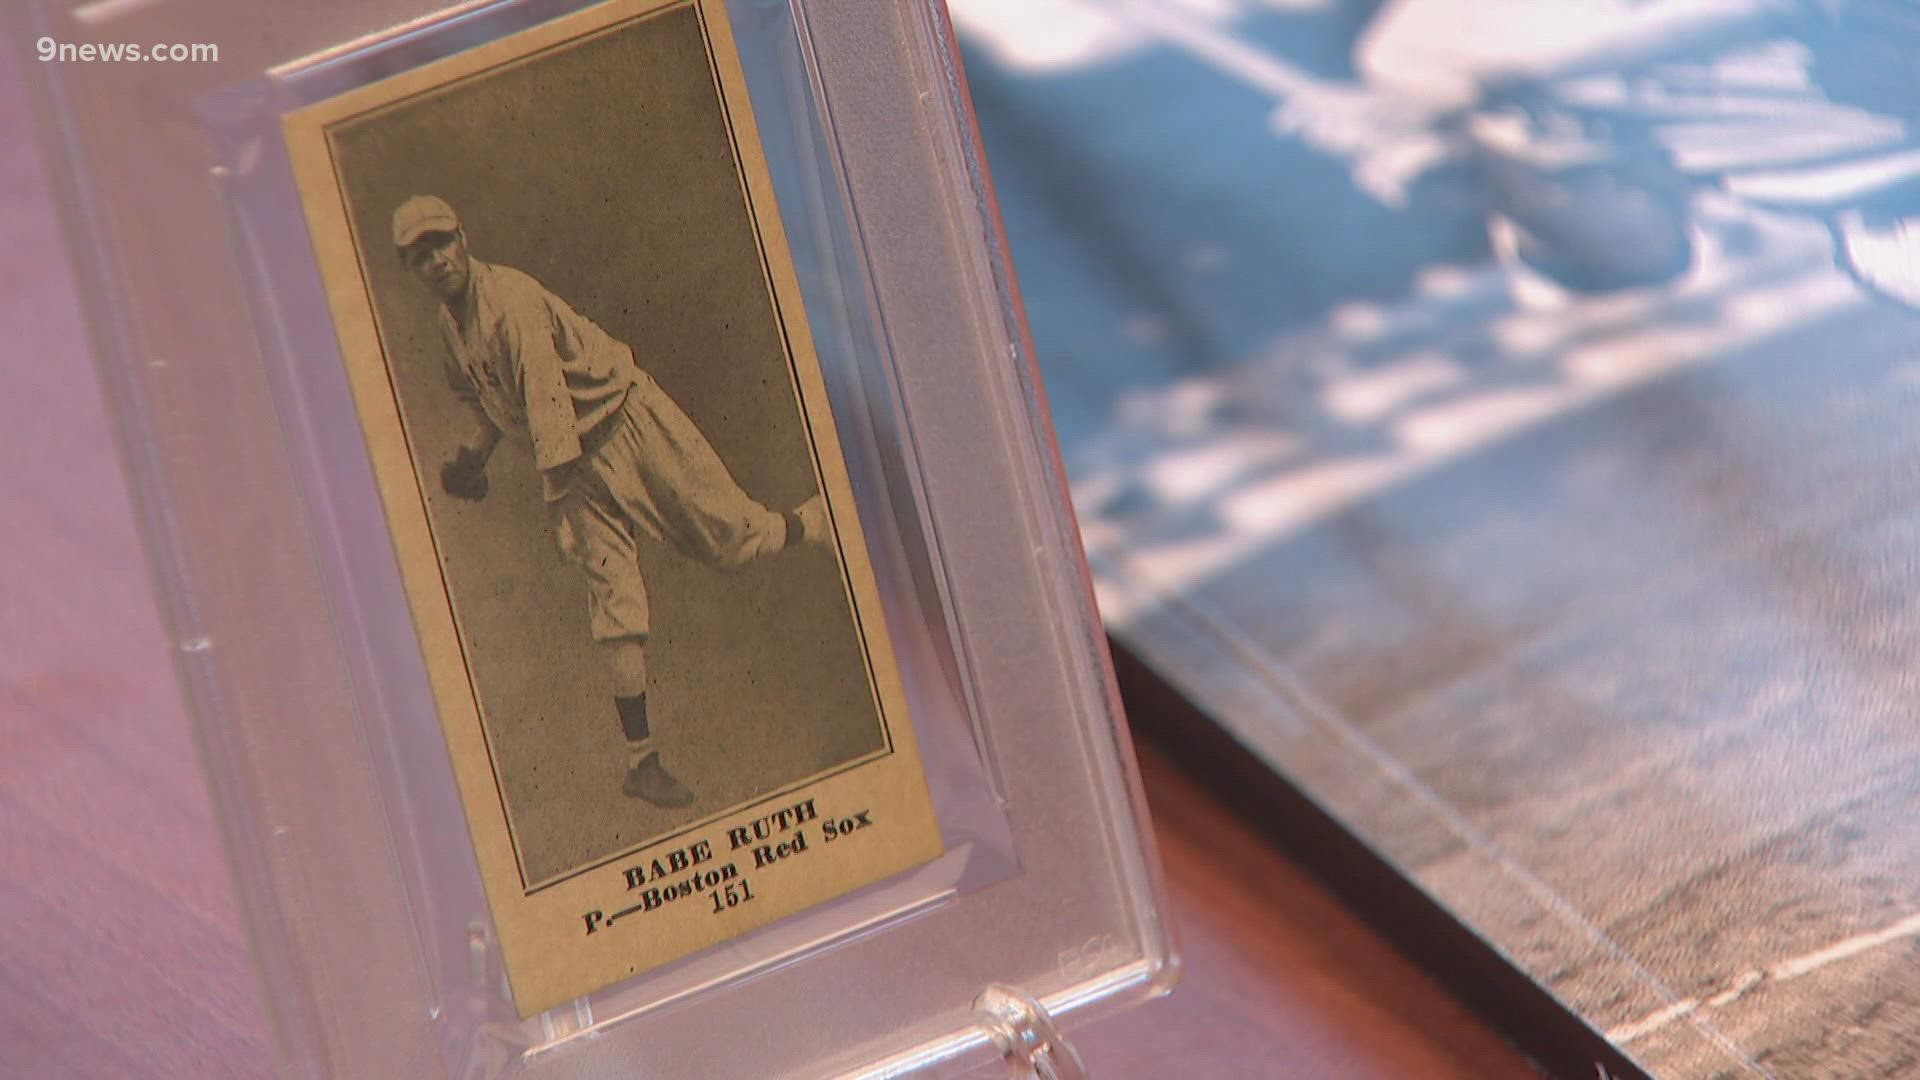 Mickey Mantle rookie card could fetch record $10 million at